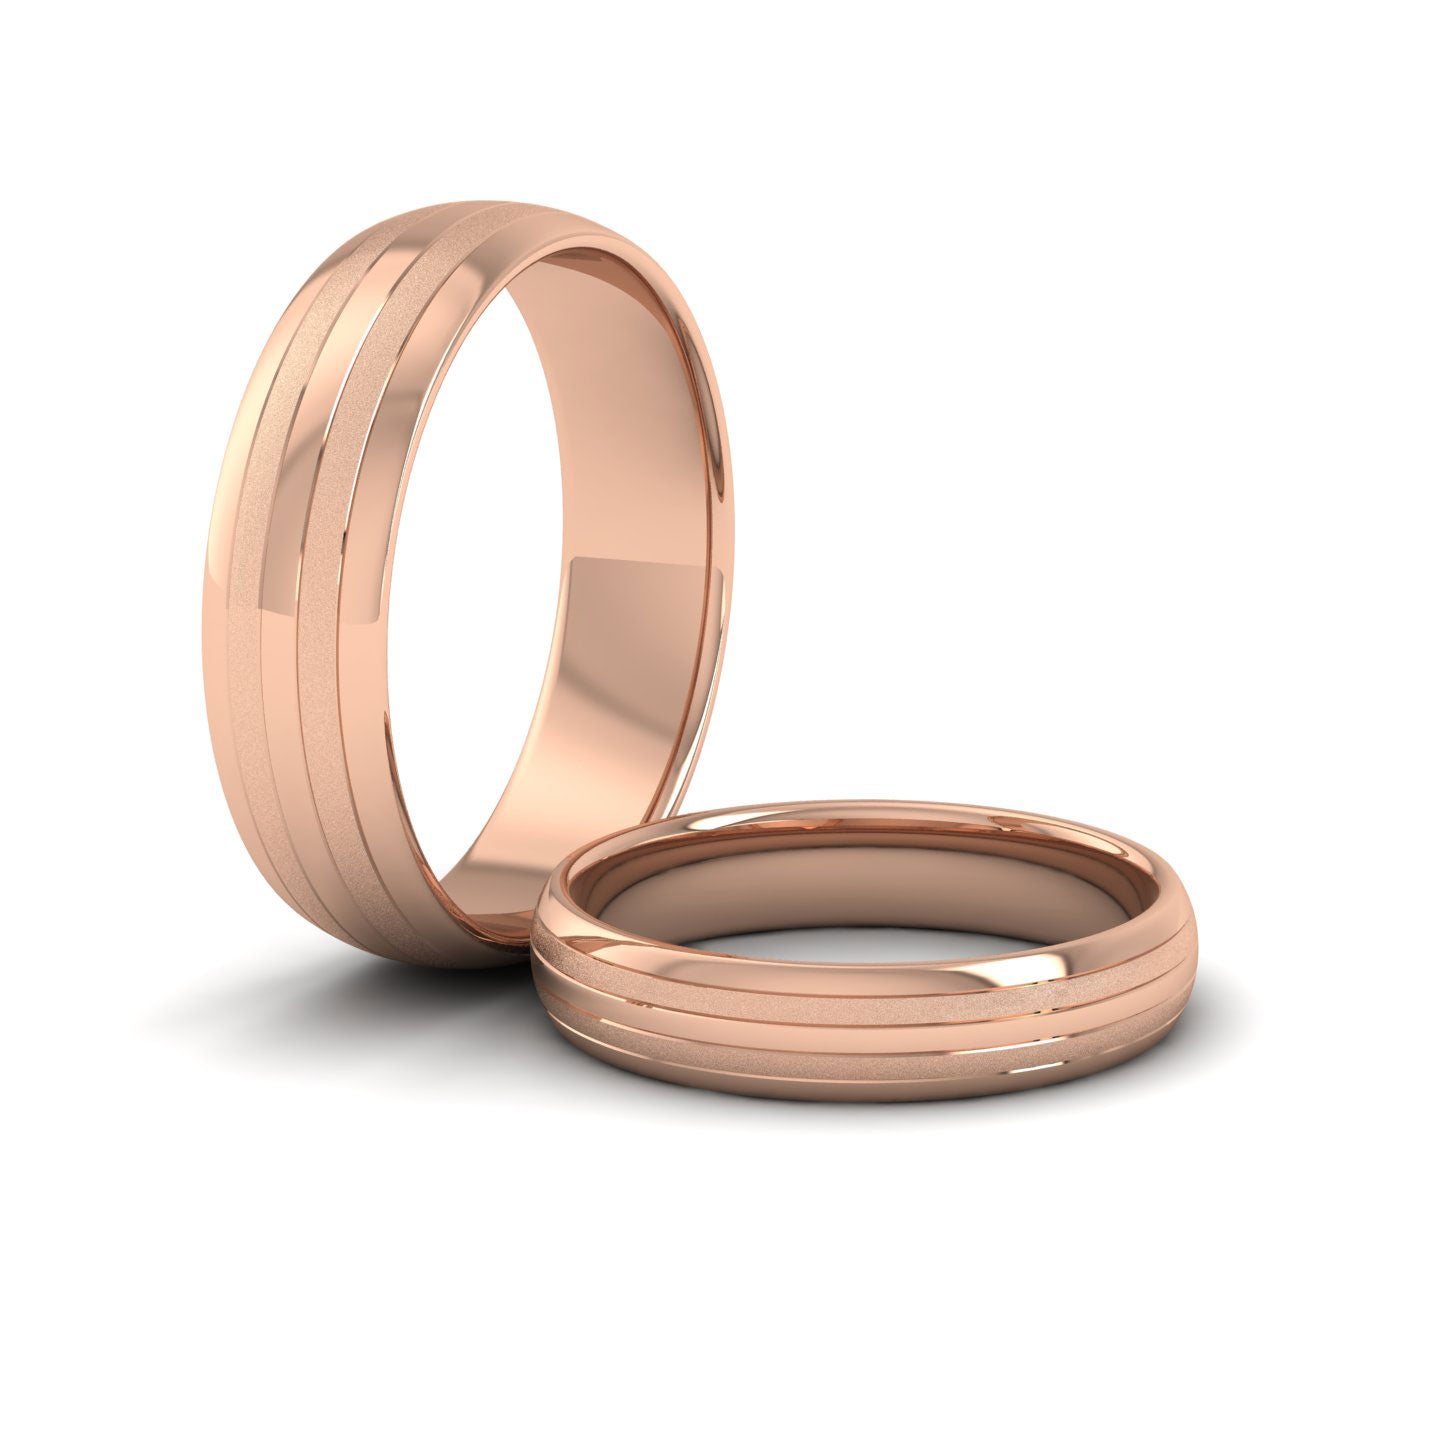 Four Line Pattern With Shiny And Matt Finish 18ct Rose Gold 4mm Wedding Ring